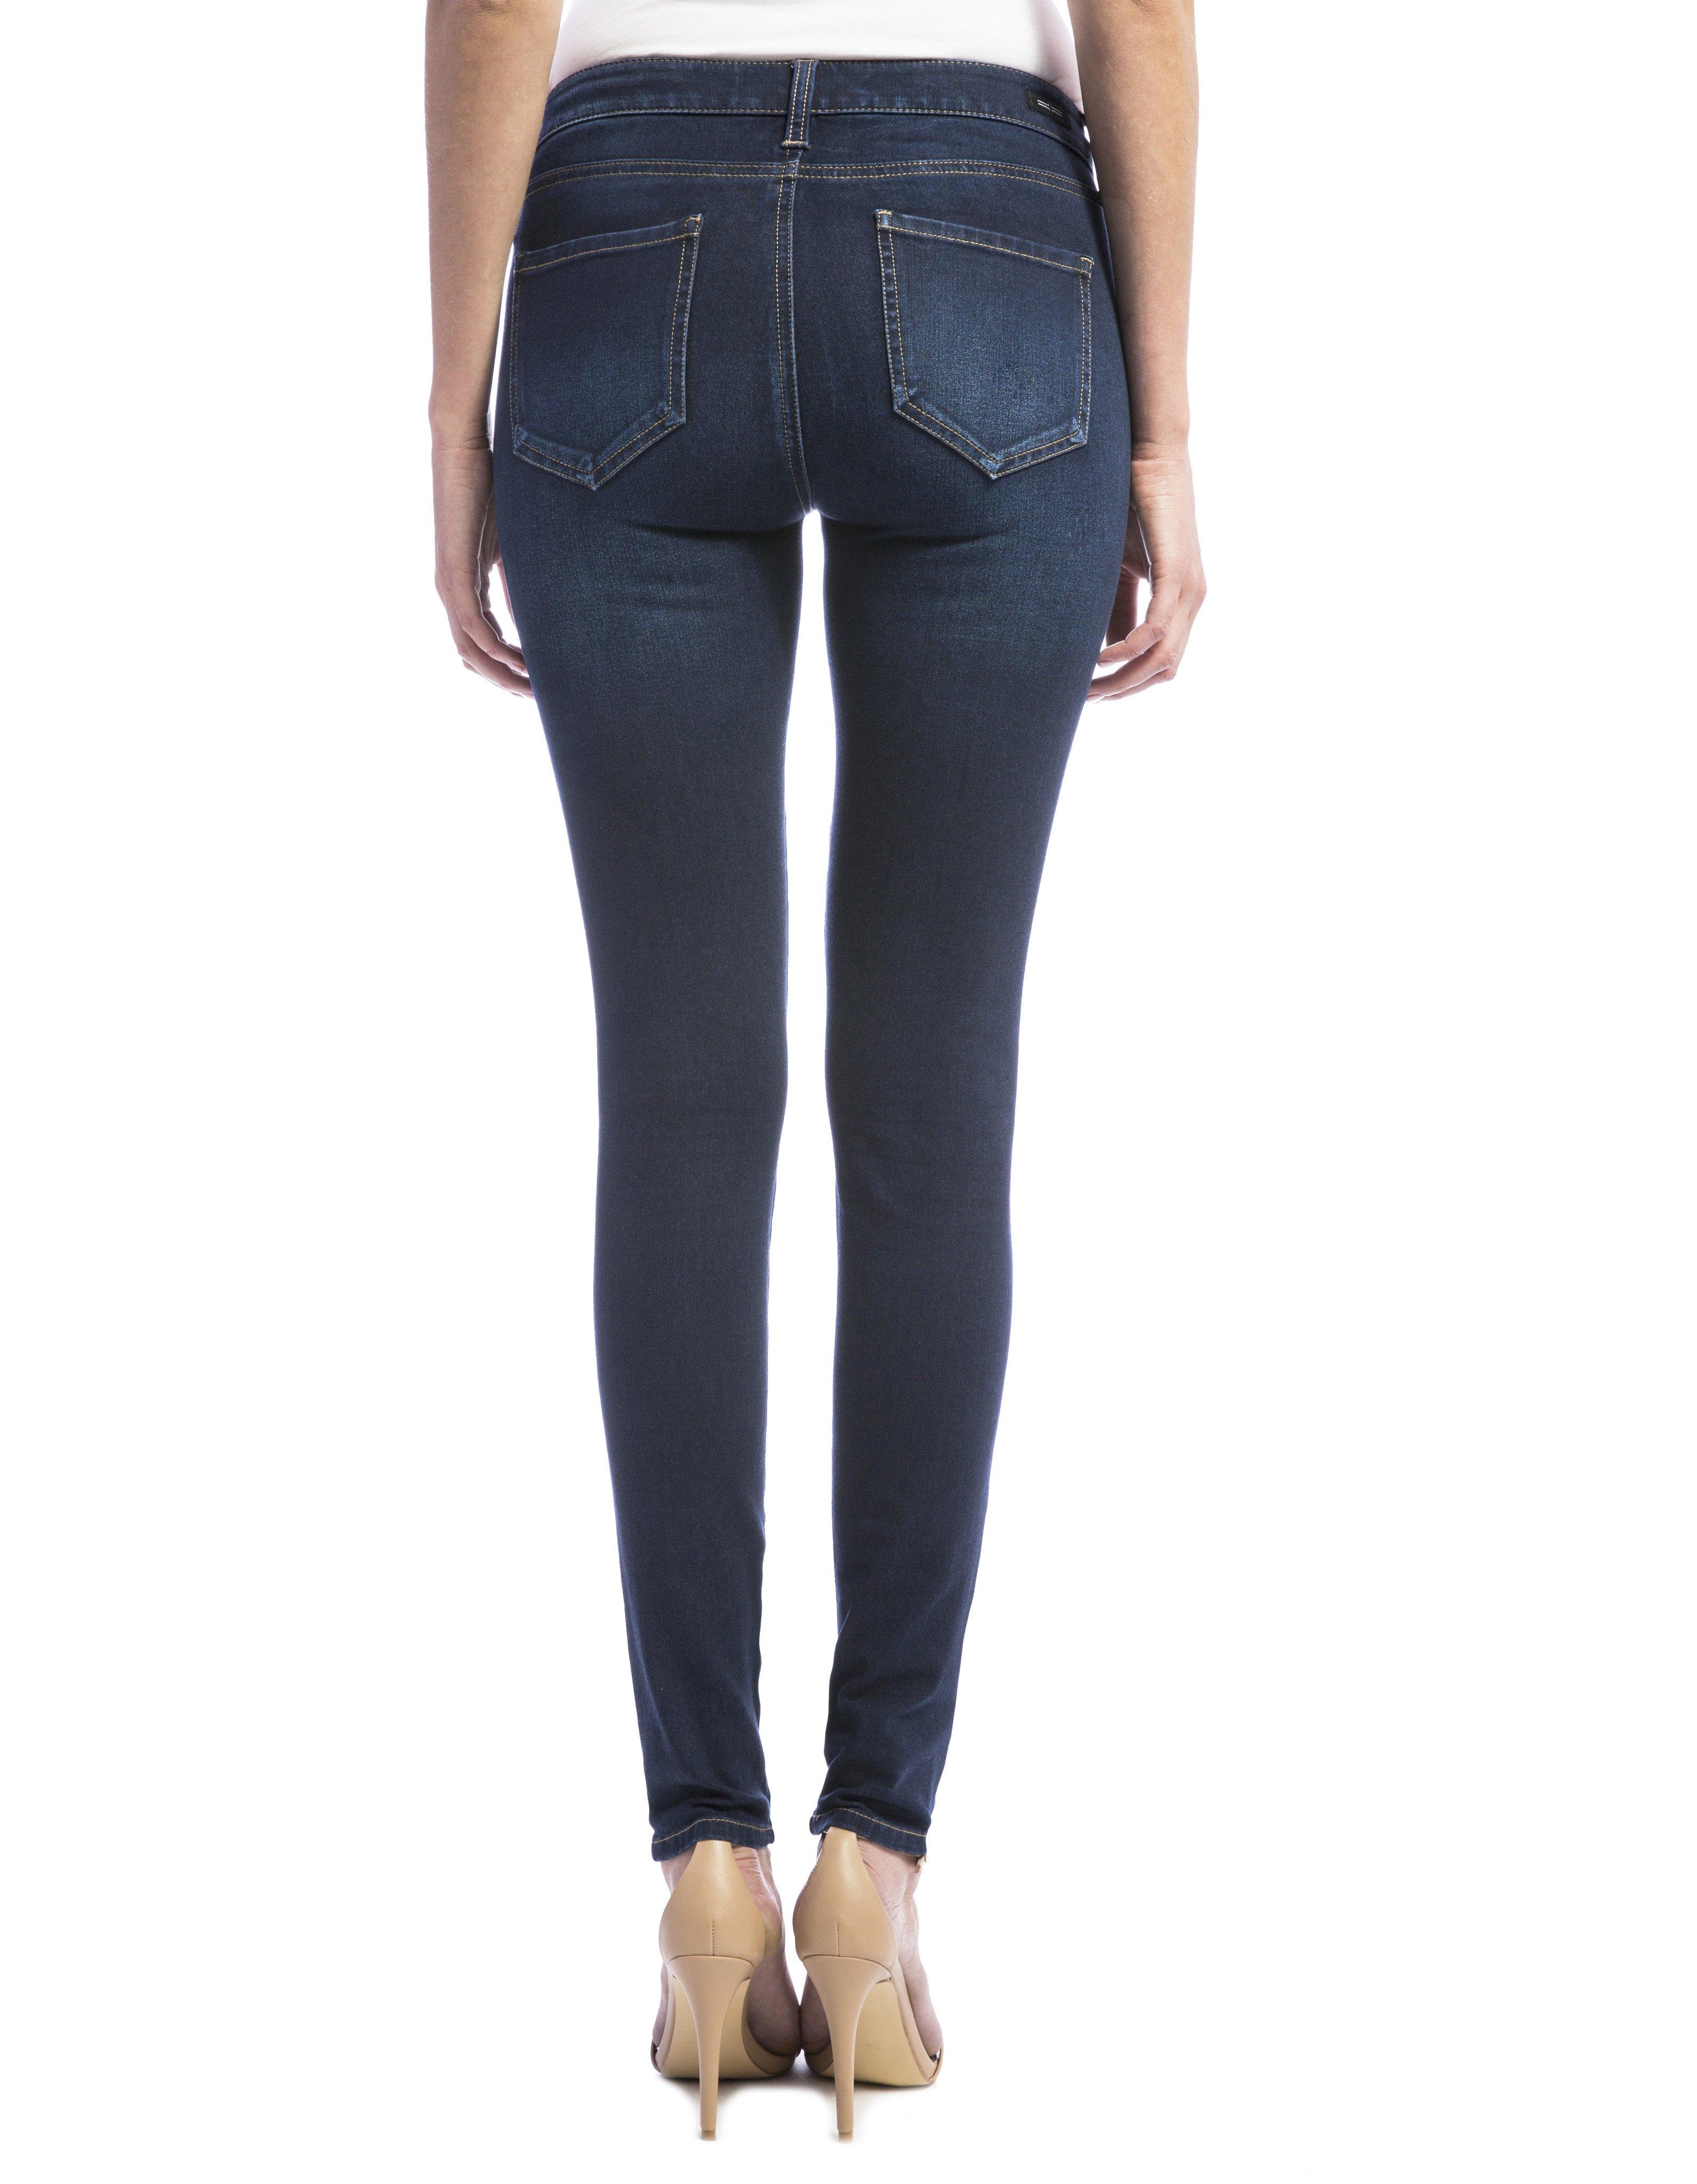 Liverpool Jeans Company Cotton Petite Abby Skinny High Performance ...